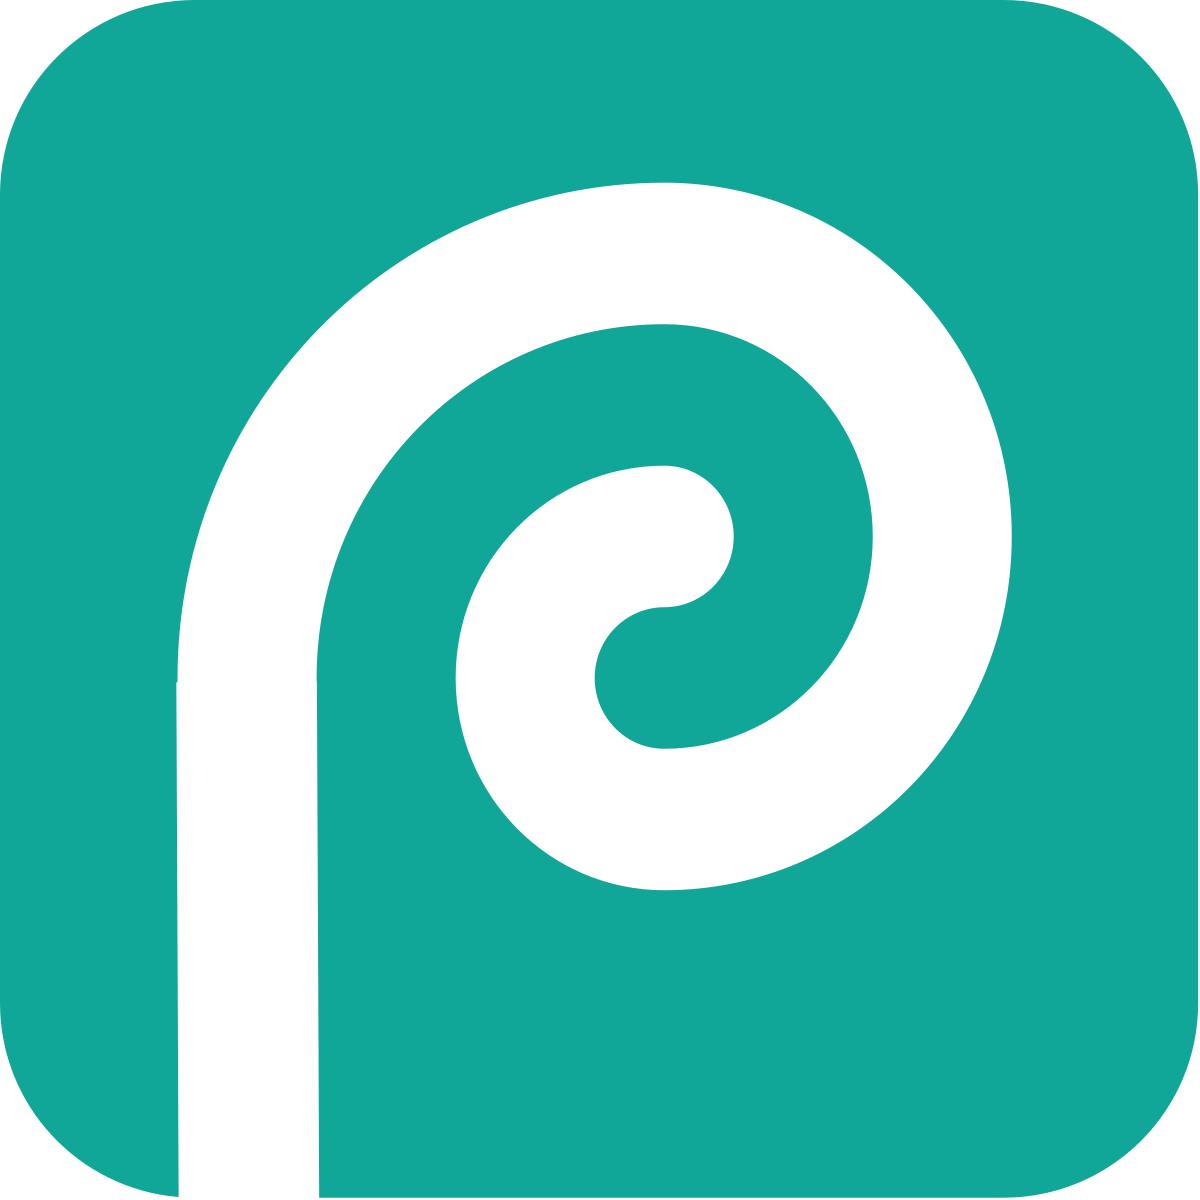 A stylized, curly letter P on a teal background.